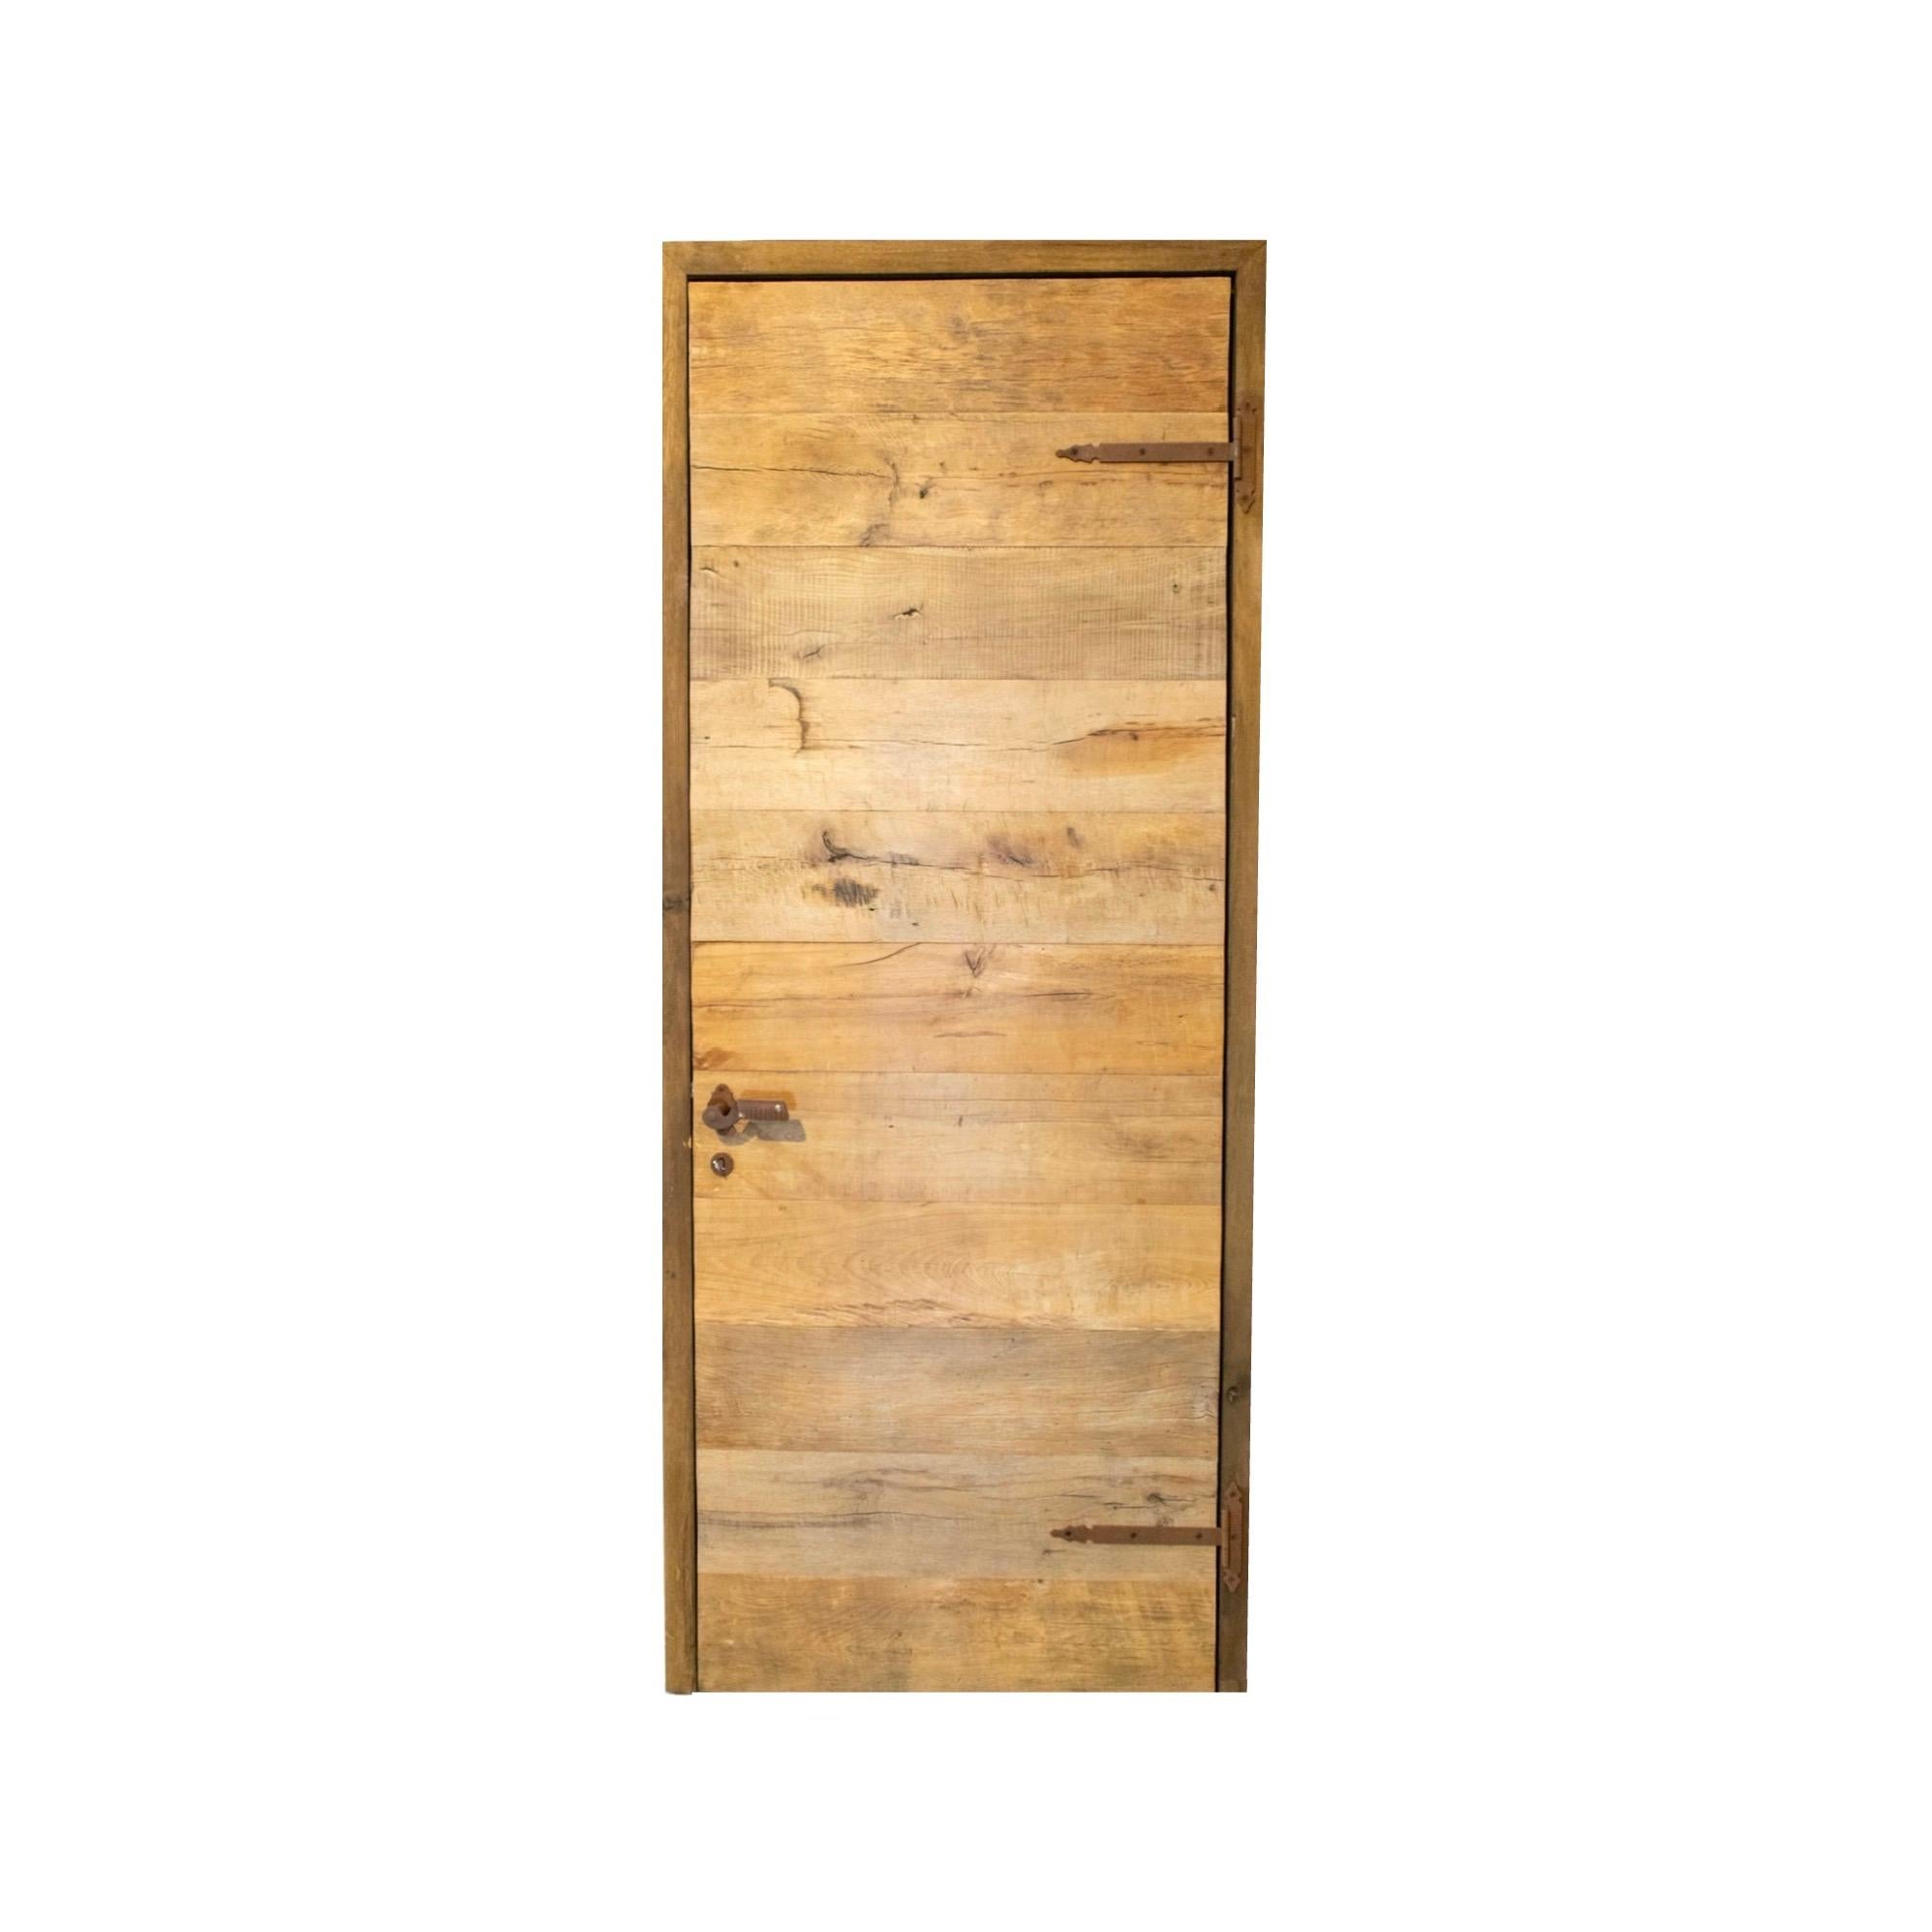 A reclaimed door made out of newly constructed oakwood. Door is lock ready and comes with a key. Circa, 18th century. 

Reclaimed rustic doors are doors made from used materials that have been refurbished and given a new purpose. They often have a